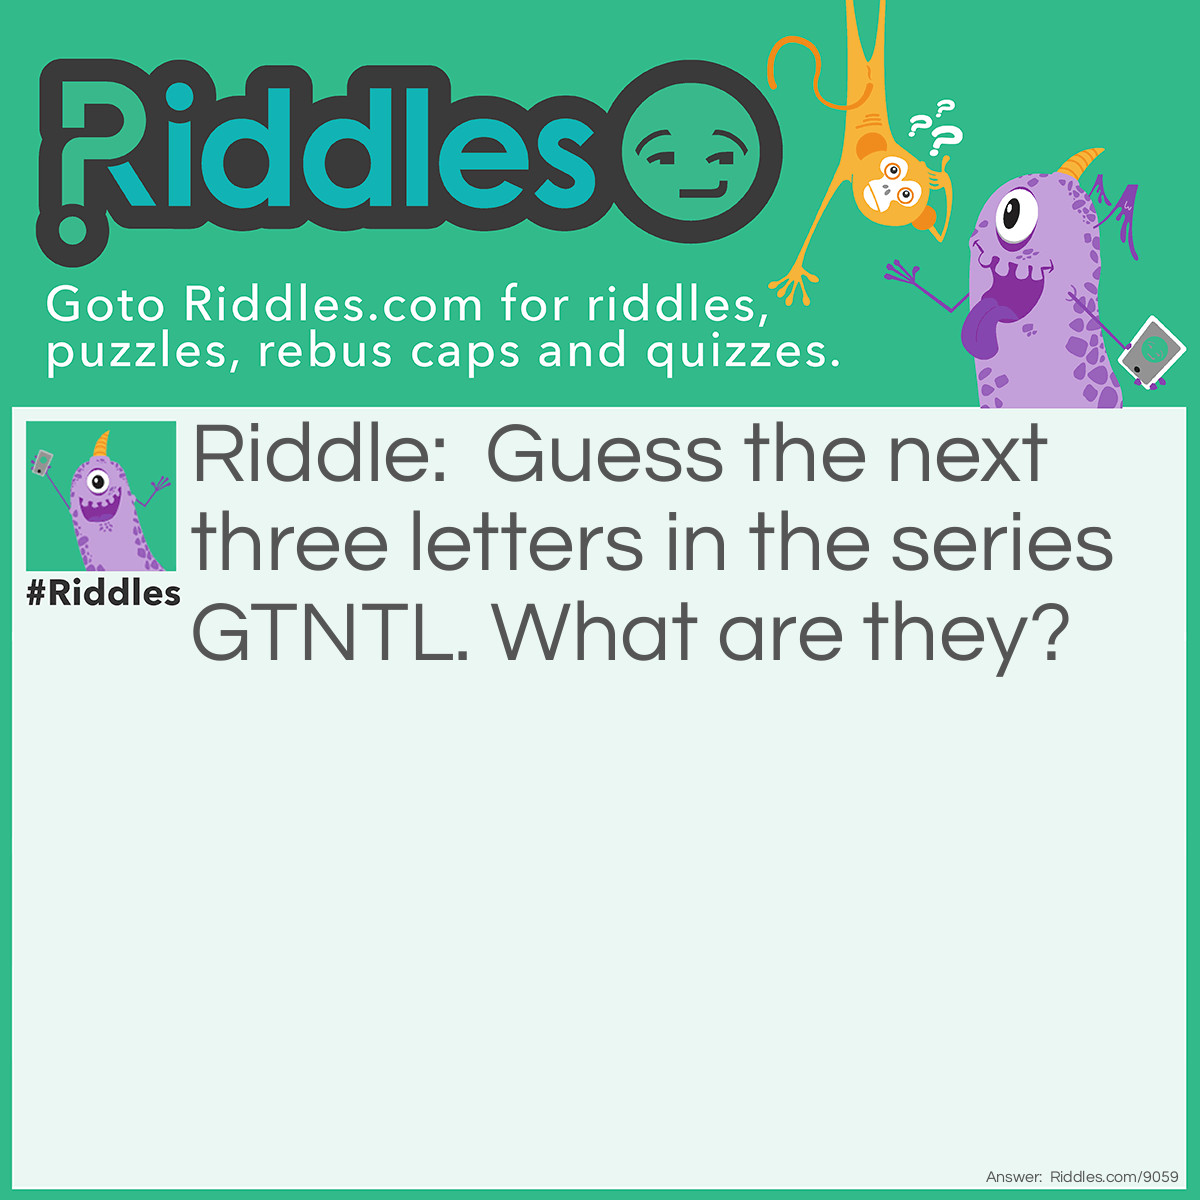 Riddle: Guess the next three letters in the series GTNTL. What are they? Answer: I, T, S. The complete sequence is the first letter of every word in the sentence.